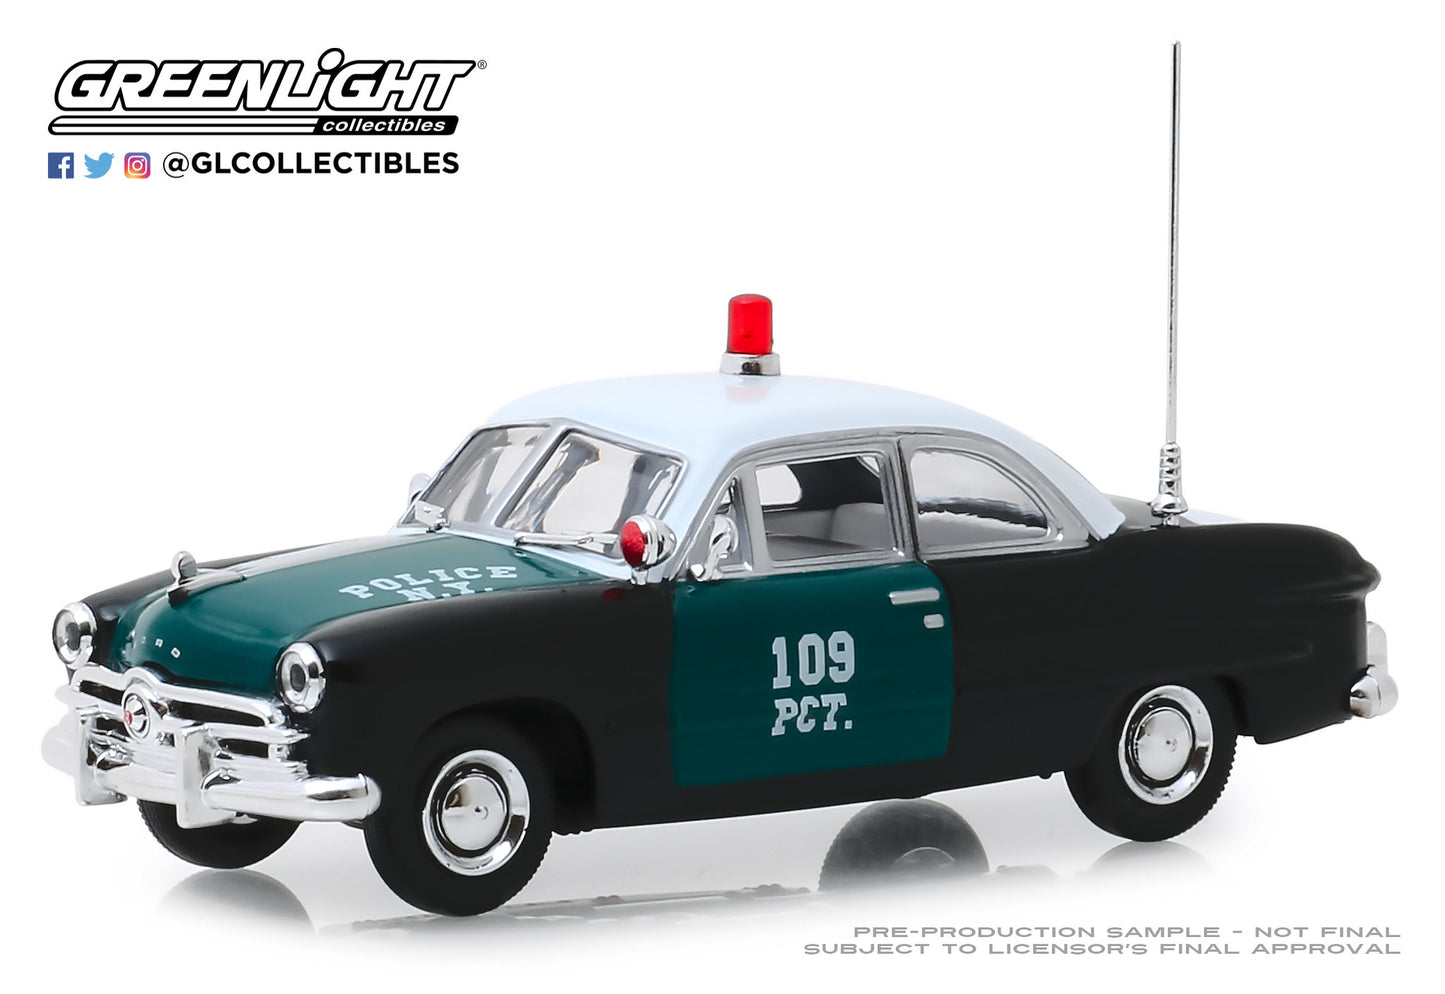 GreenLight 1/43 1949 Ford - New York City Police Dept (NYPD) 86165